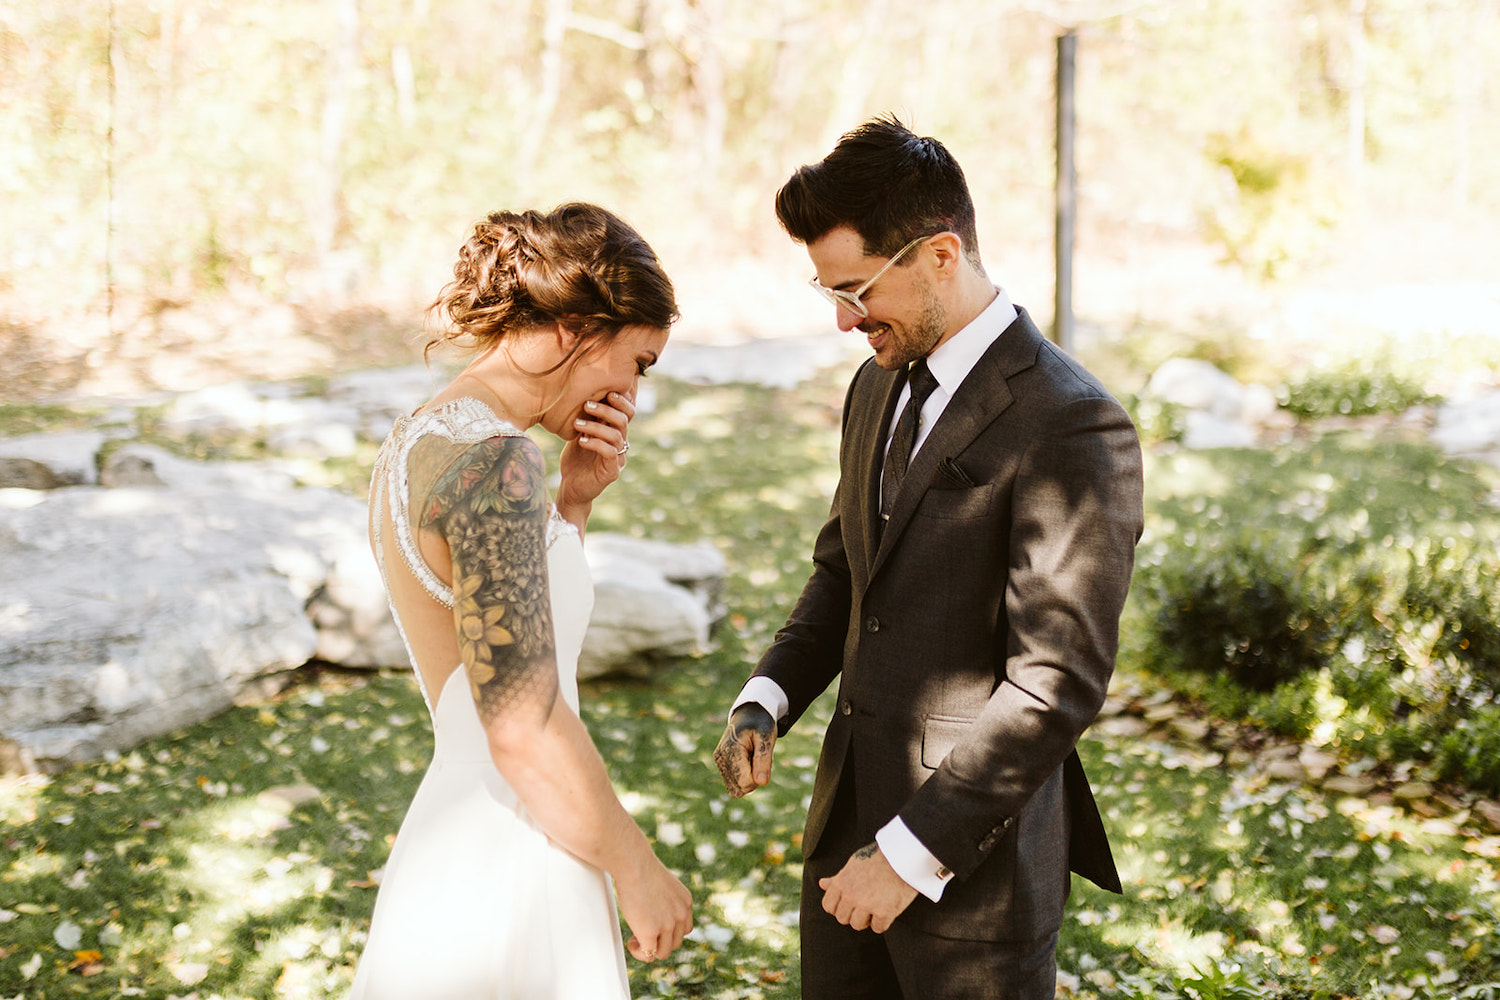 bride and groom laugh together in the shade of large trees as they share their first look